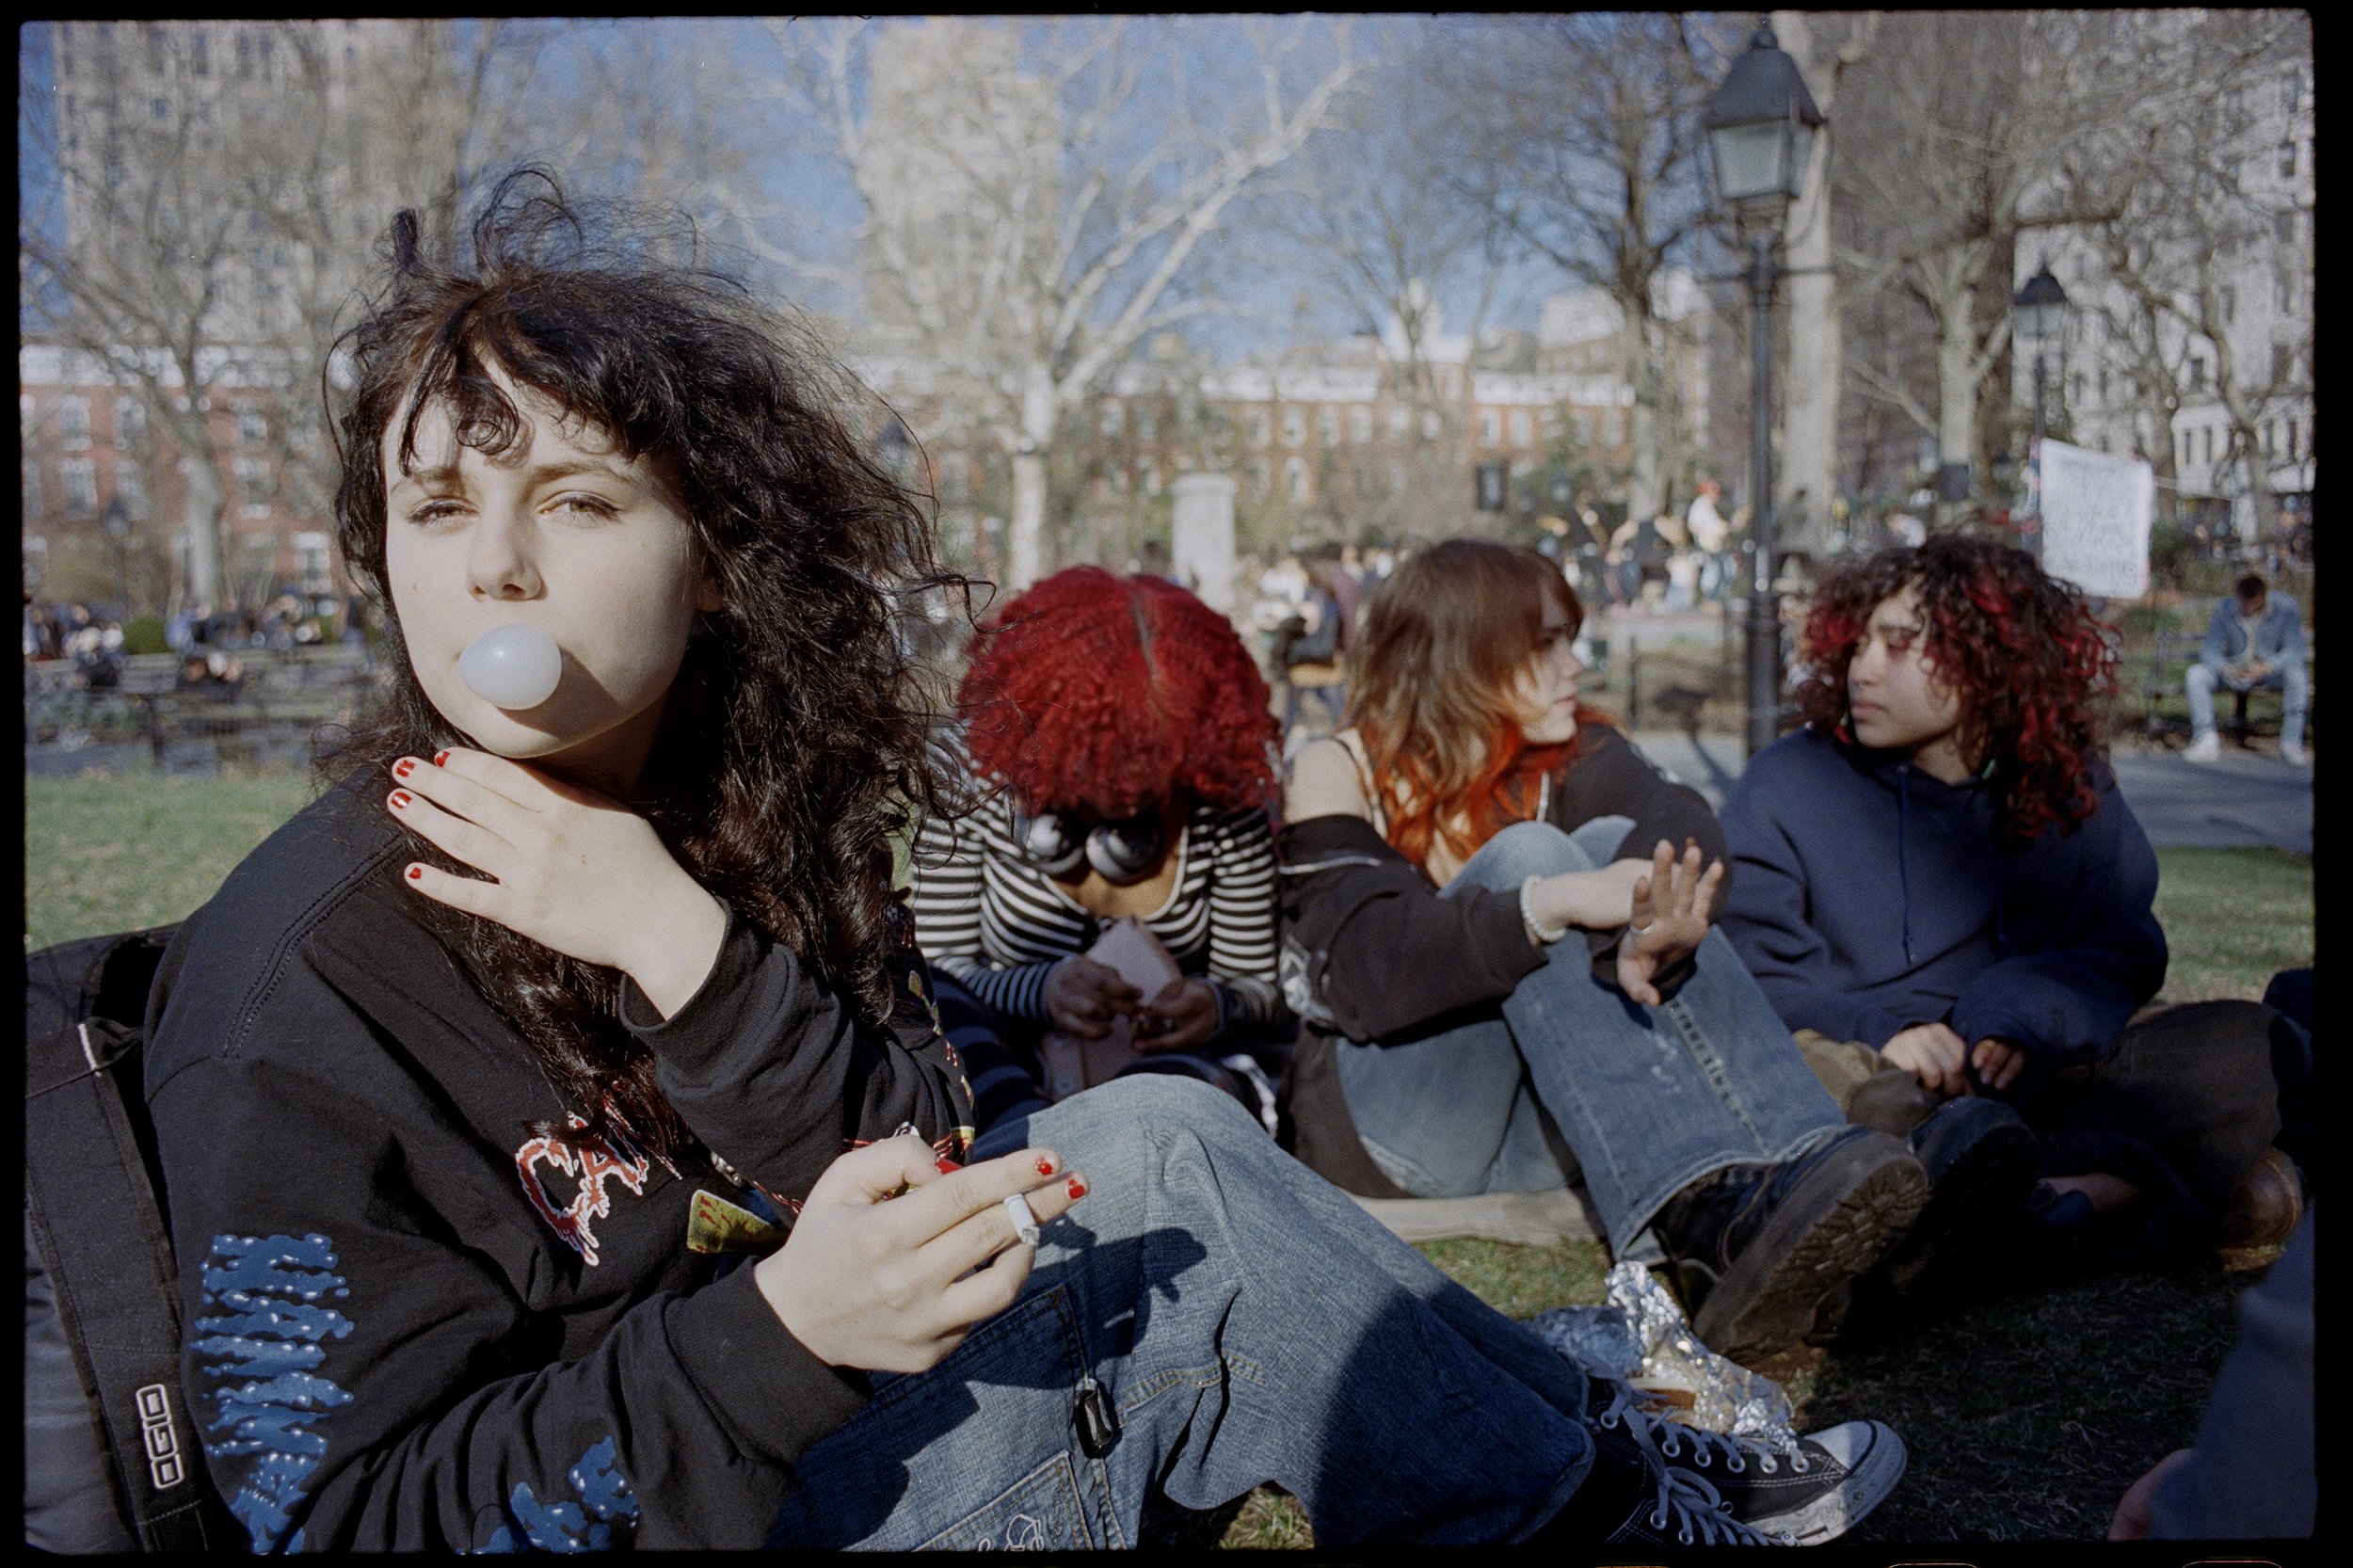 Mary with gum and smoke in grass 001.jpg